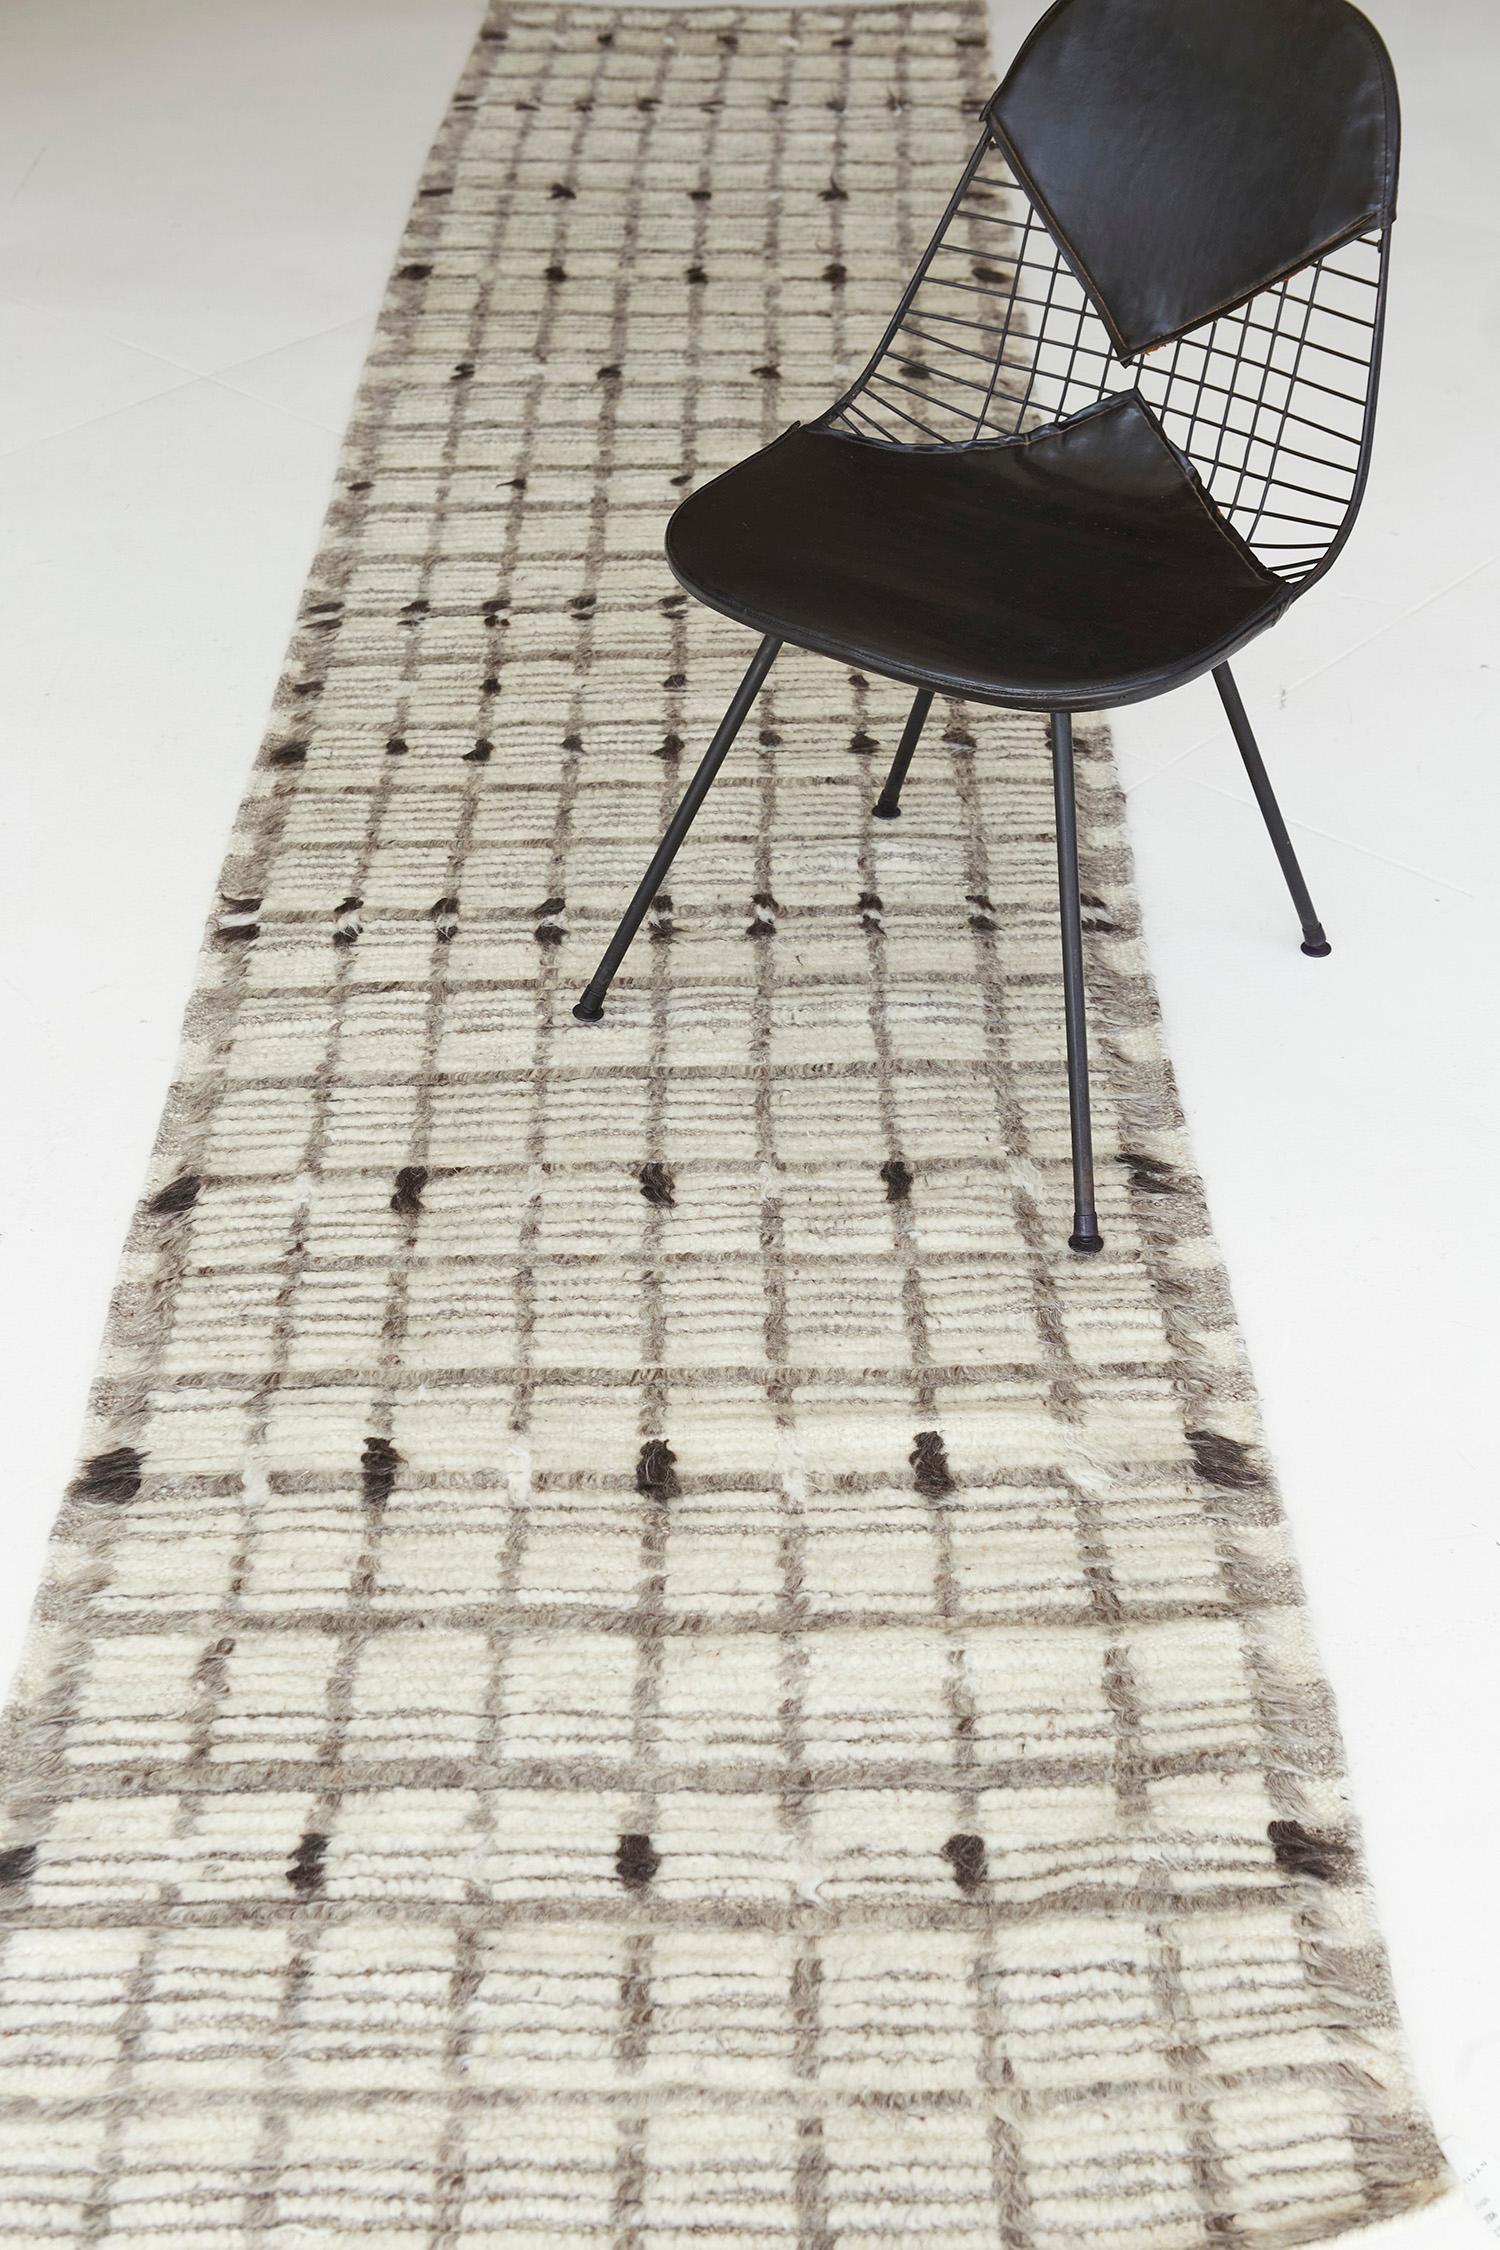 Amihan is a beautifully detailed pile weave from our Atlas Collection. The delicate checkered and ribbed style rug with ash gray tones gives a rich and charming feel. Repeating ash pile detailing also brings a bold and noteworthy uniqueness to this